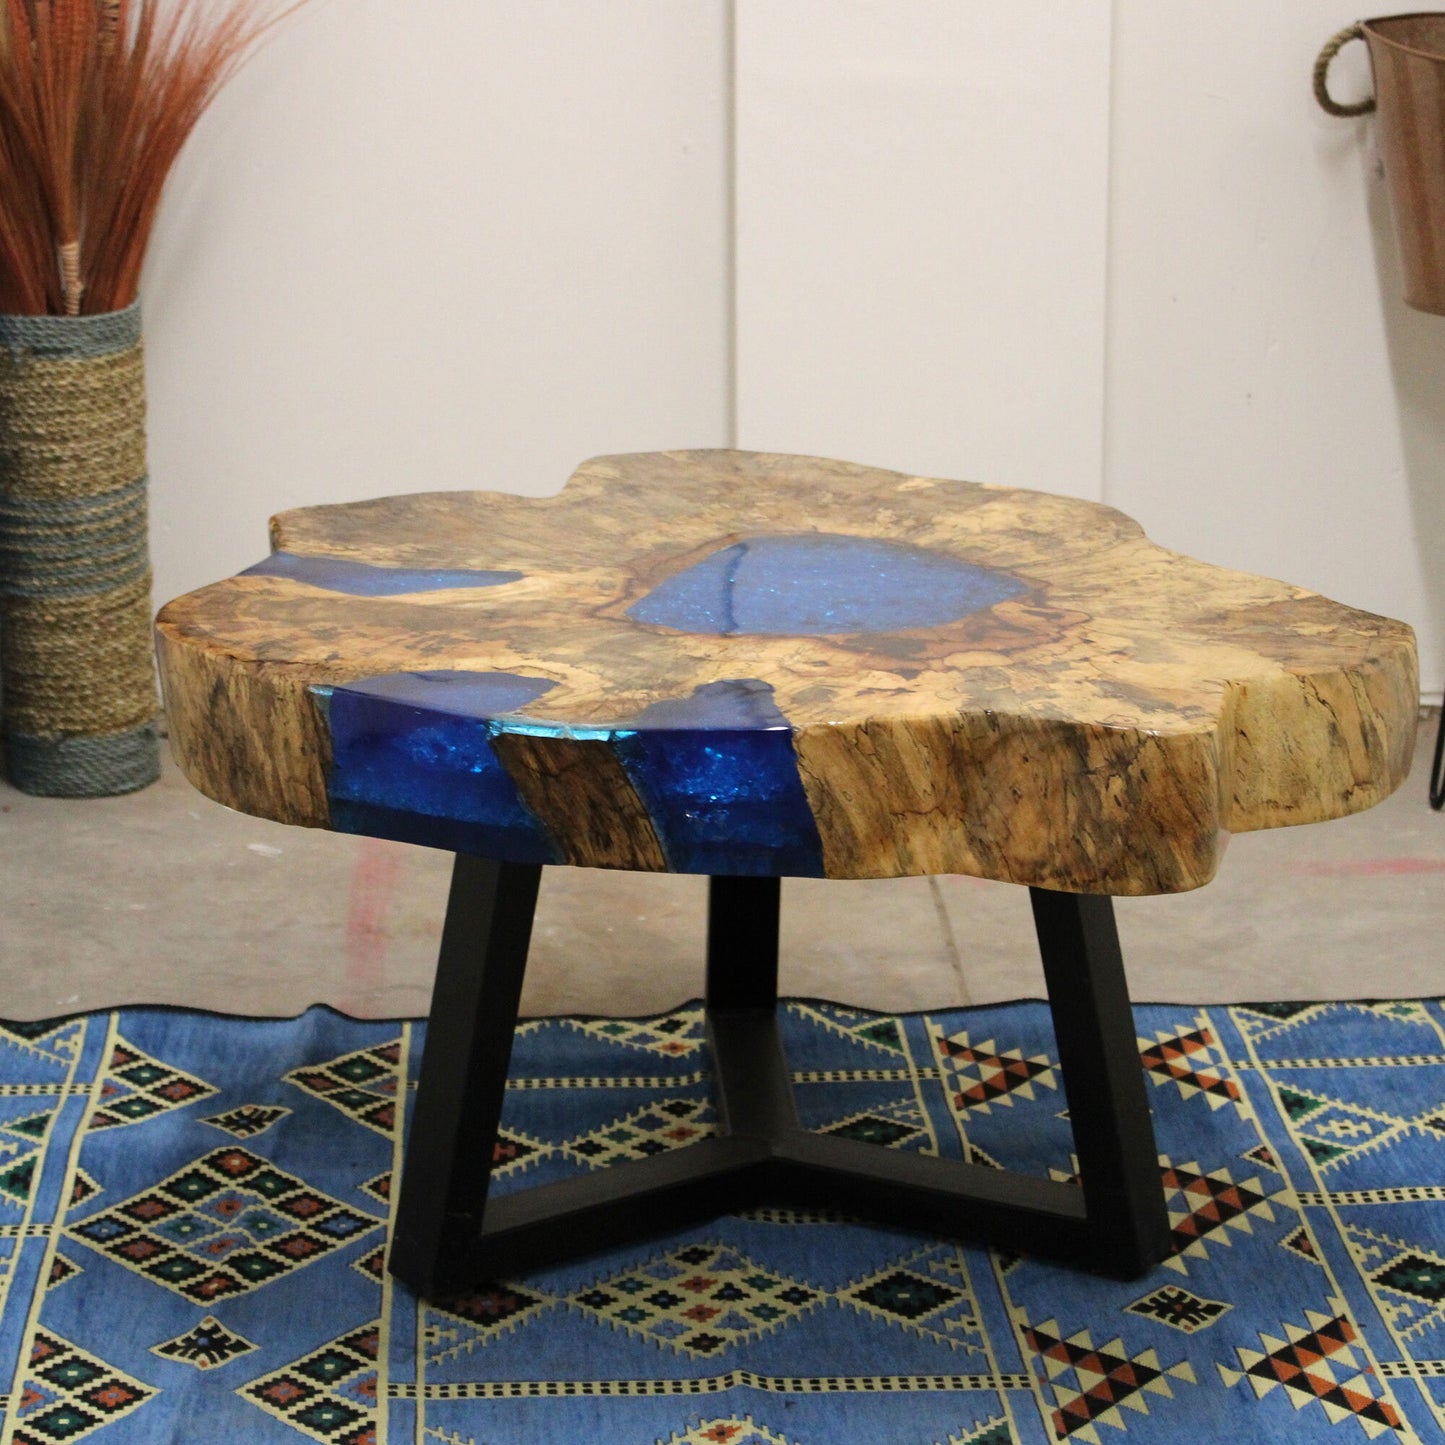 Tamarind wood and Resin Coffee Table-sky-blue hand-made, recycled, unique- 46x77 (cm) Etsy